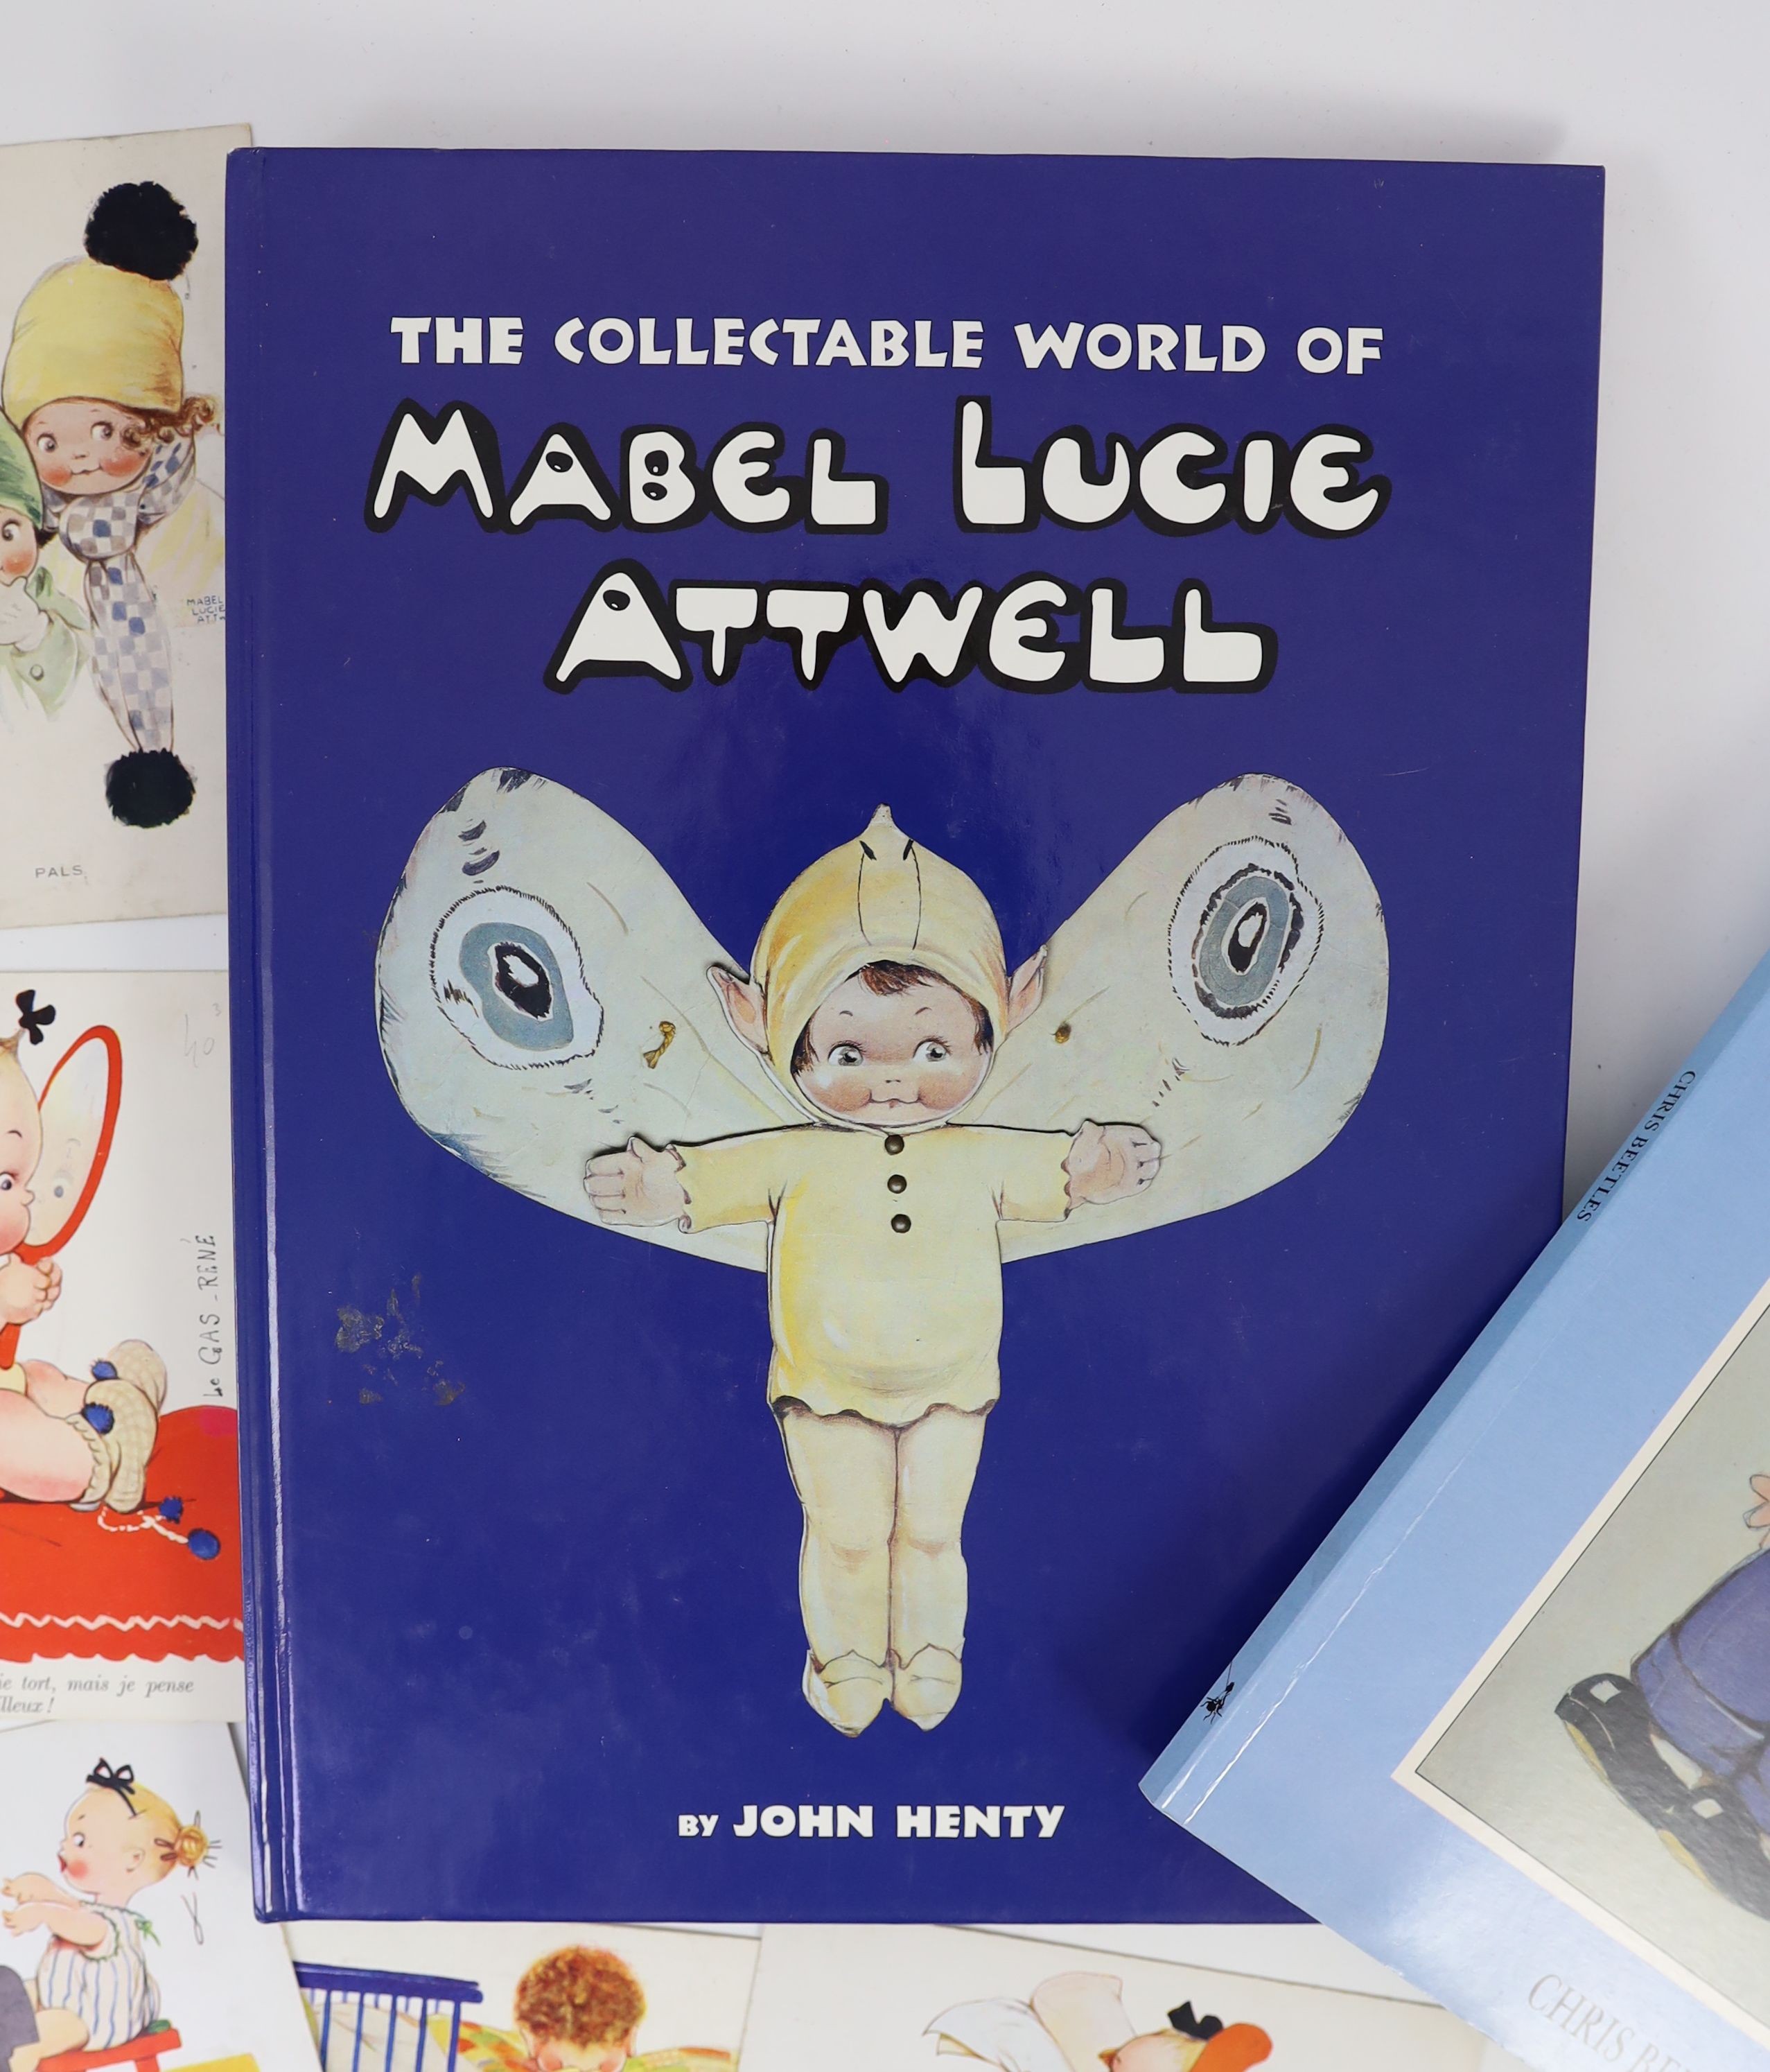 Mabel Lucy Attwell - a collection of 56 postcards, unmounted, and 2 books relating to the artist by, John Henty and Chris Beetles.